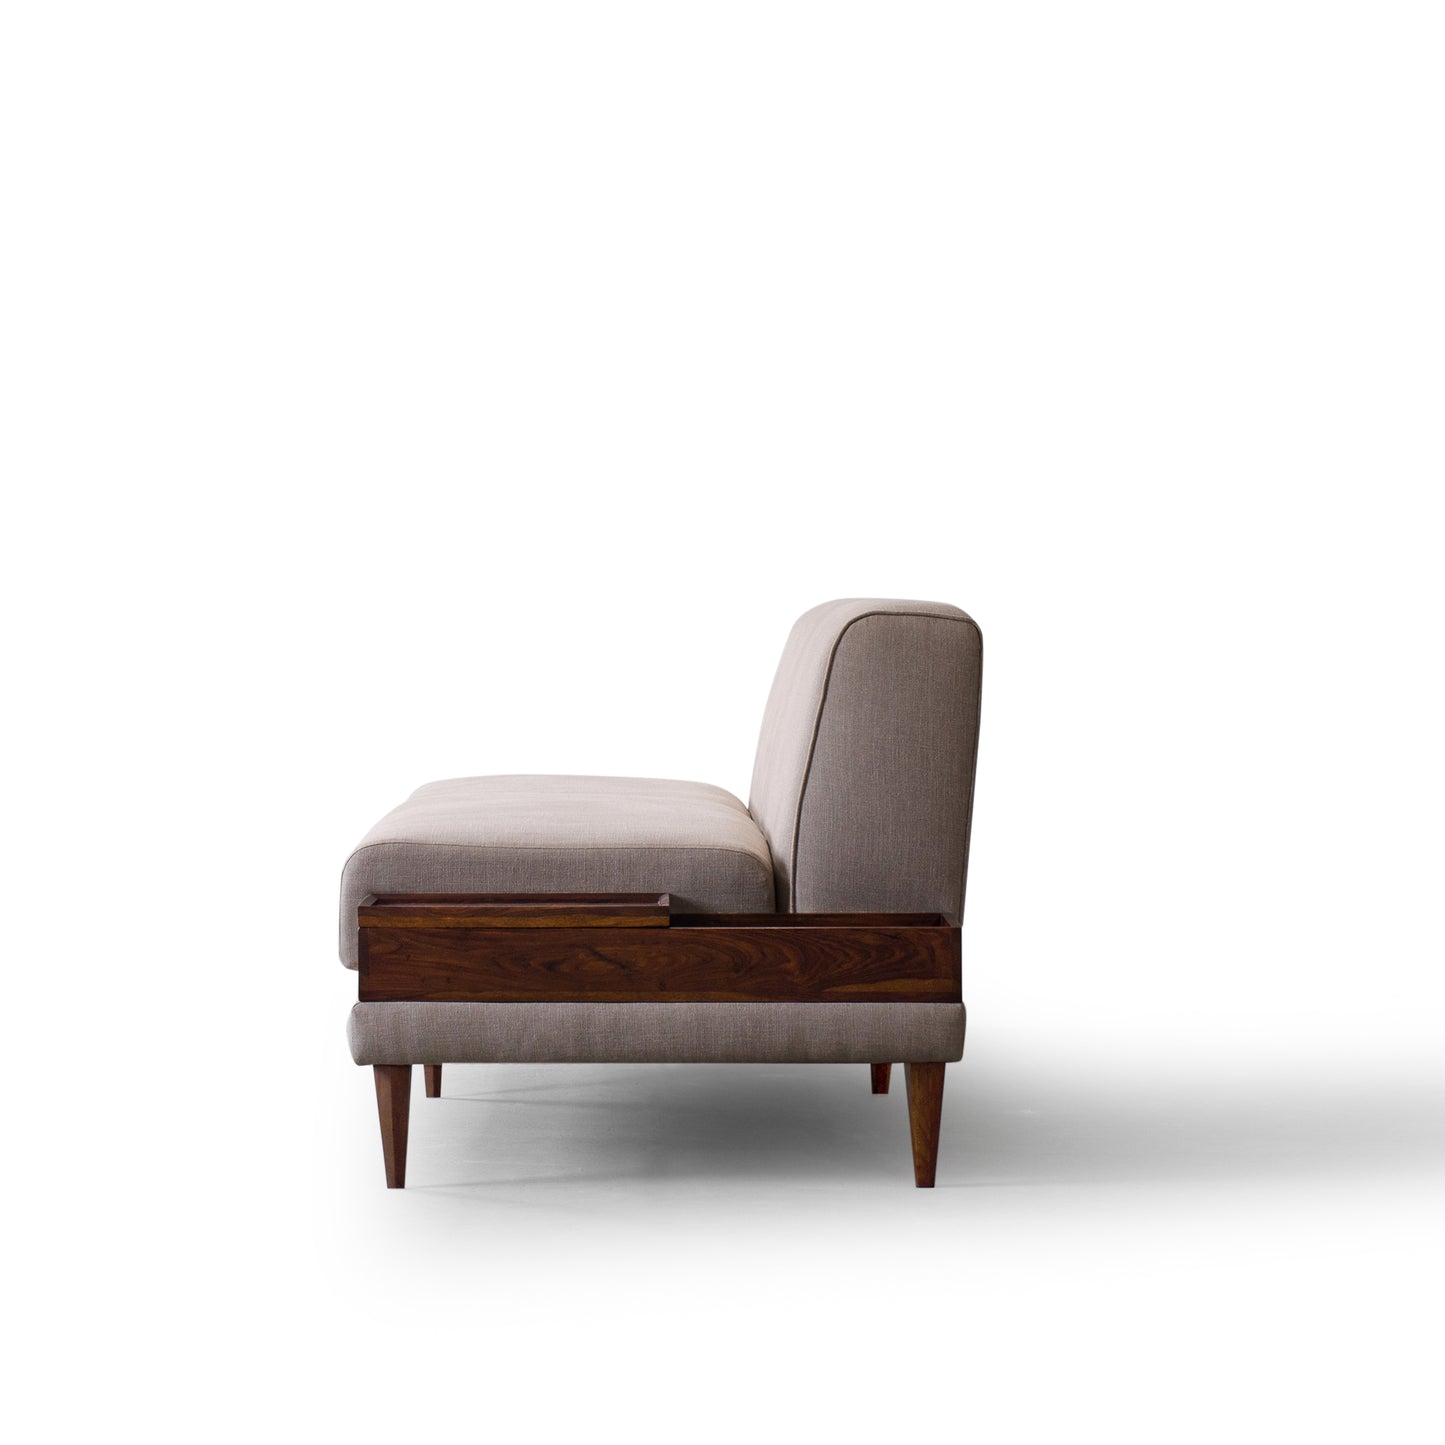 Lotus with Chute Sofa Collection